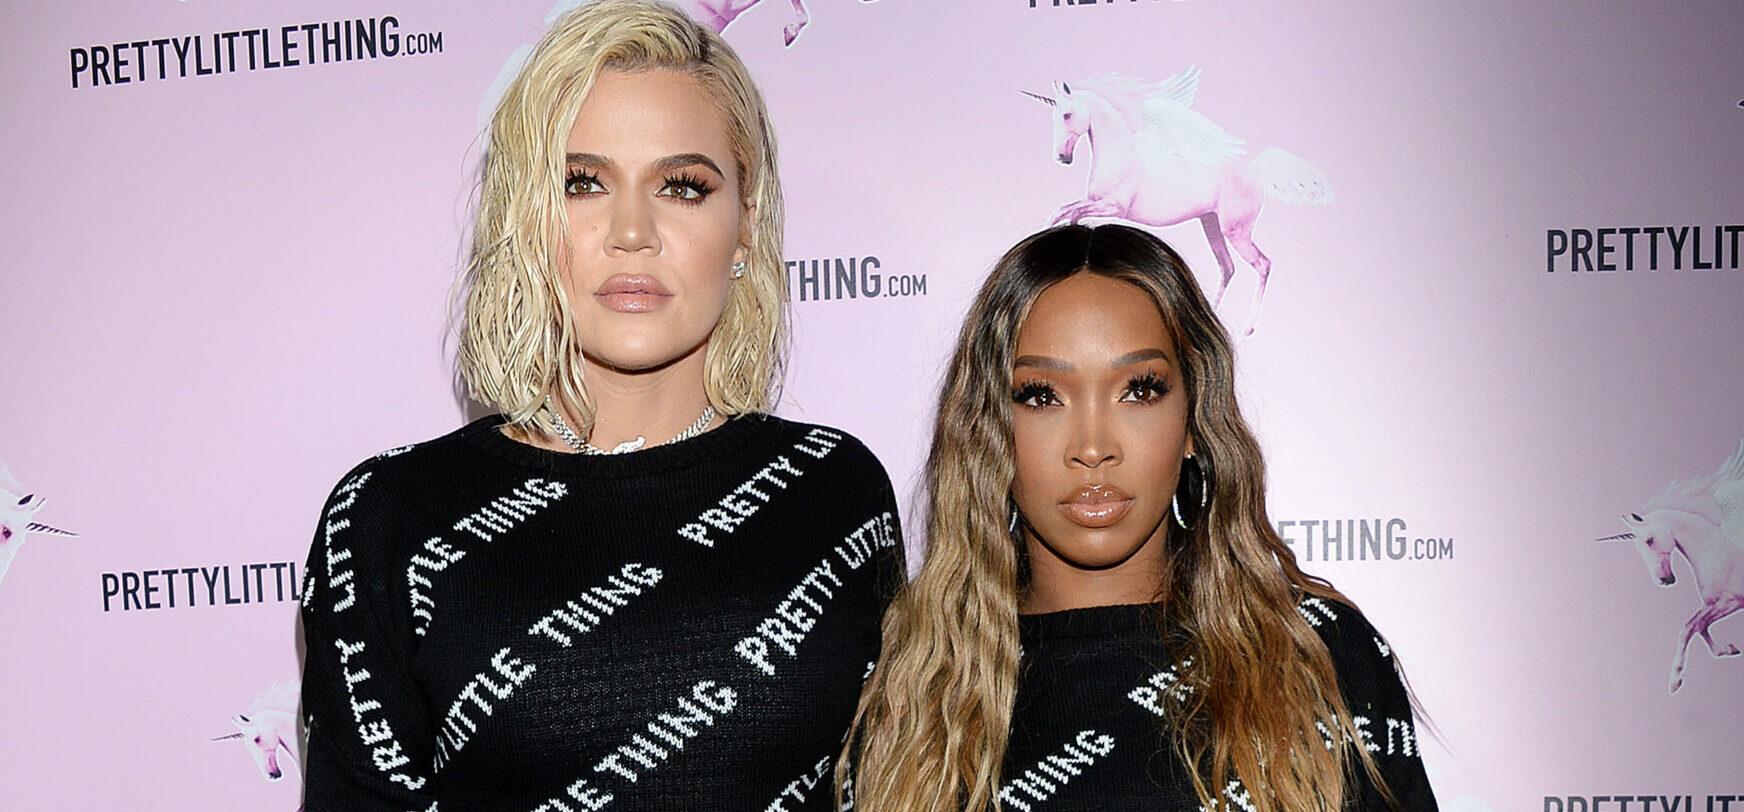 Is Khloe Kardashian ‘Not Telling’ Big Secret About Relationship With Tristan Thompson?